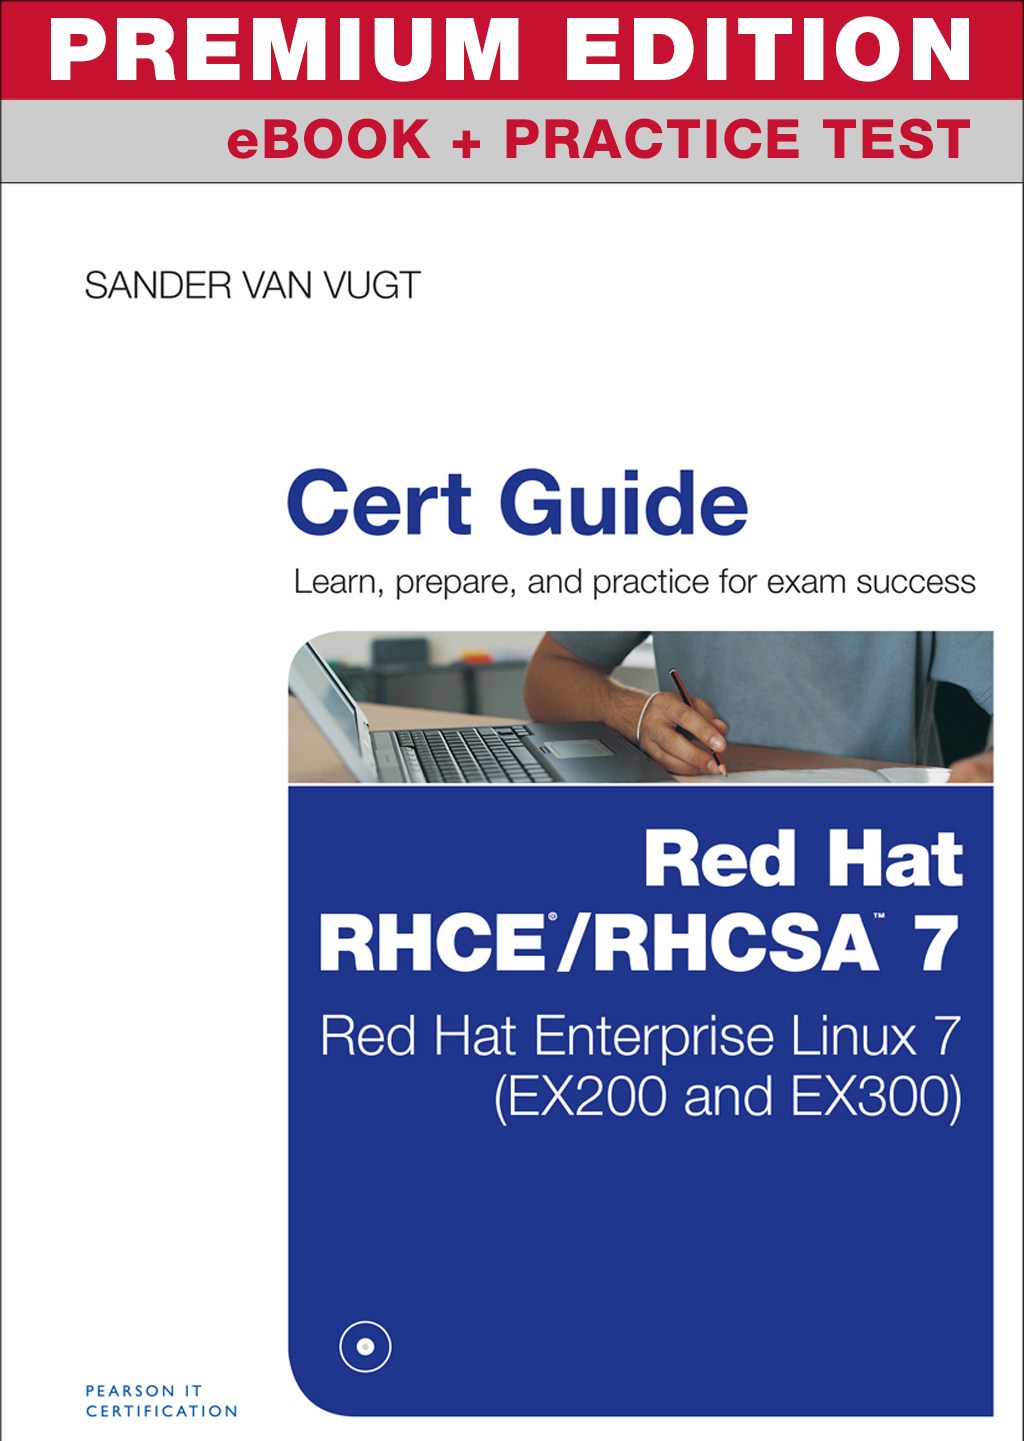 Red Hat RHCSA/RHCE 7 Cert Guide Premium Edition and Practice Tests